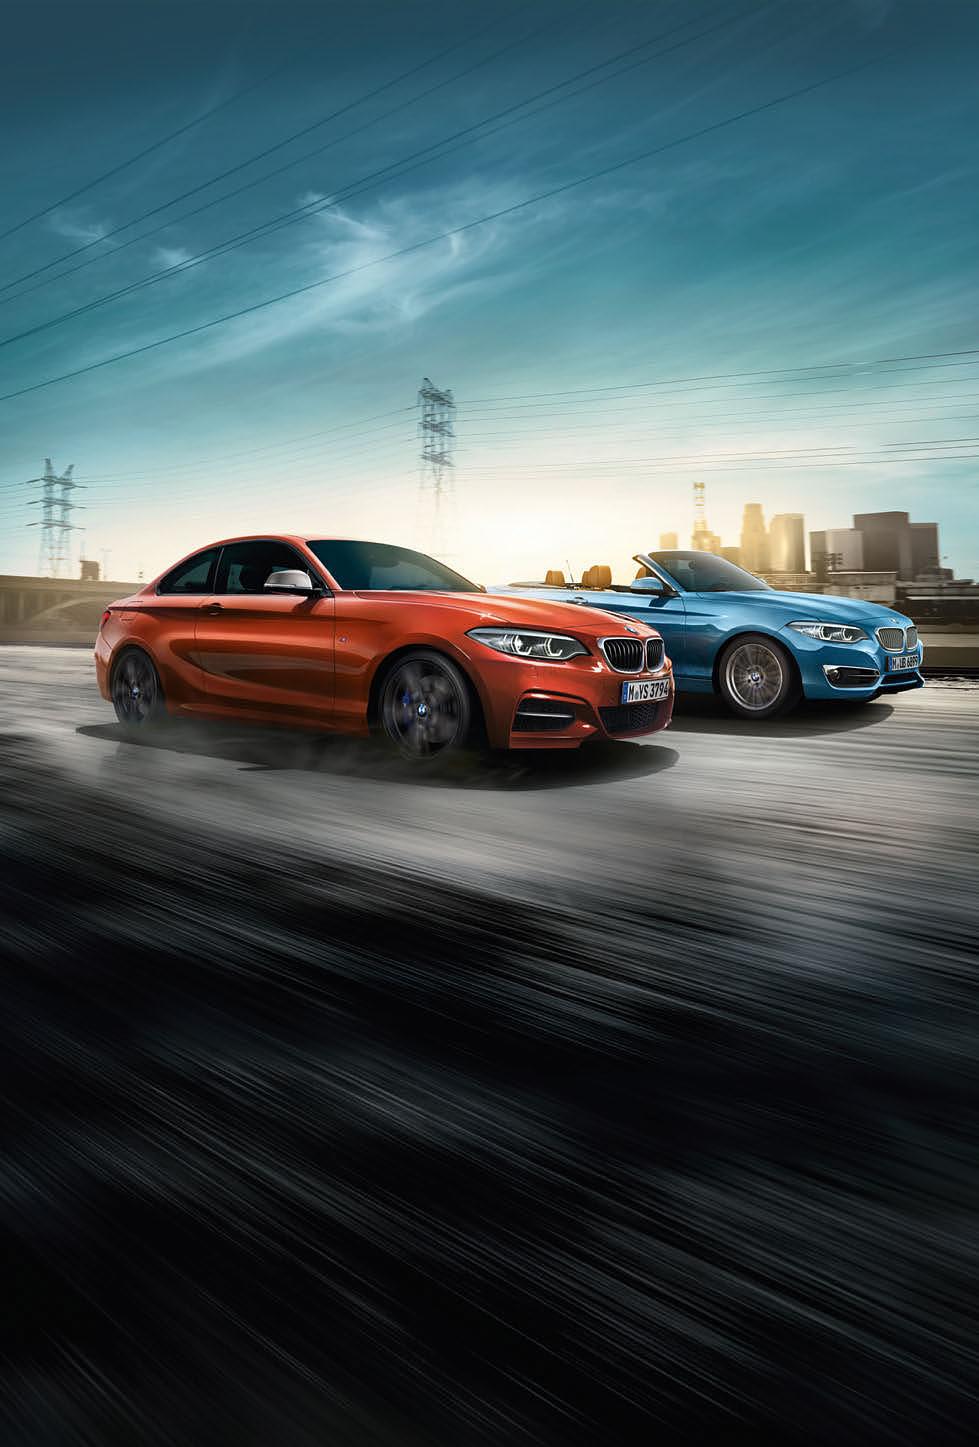 Sheer Driving Pleasure THE NEW BMW 2 SERIES COUPÉ.